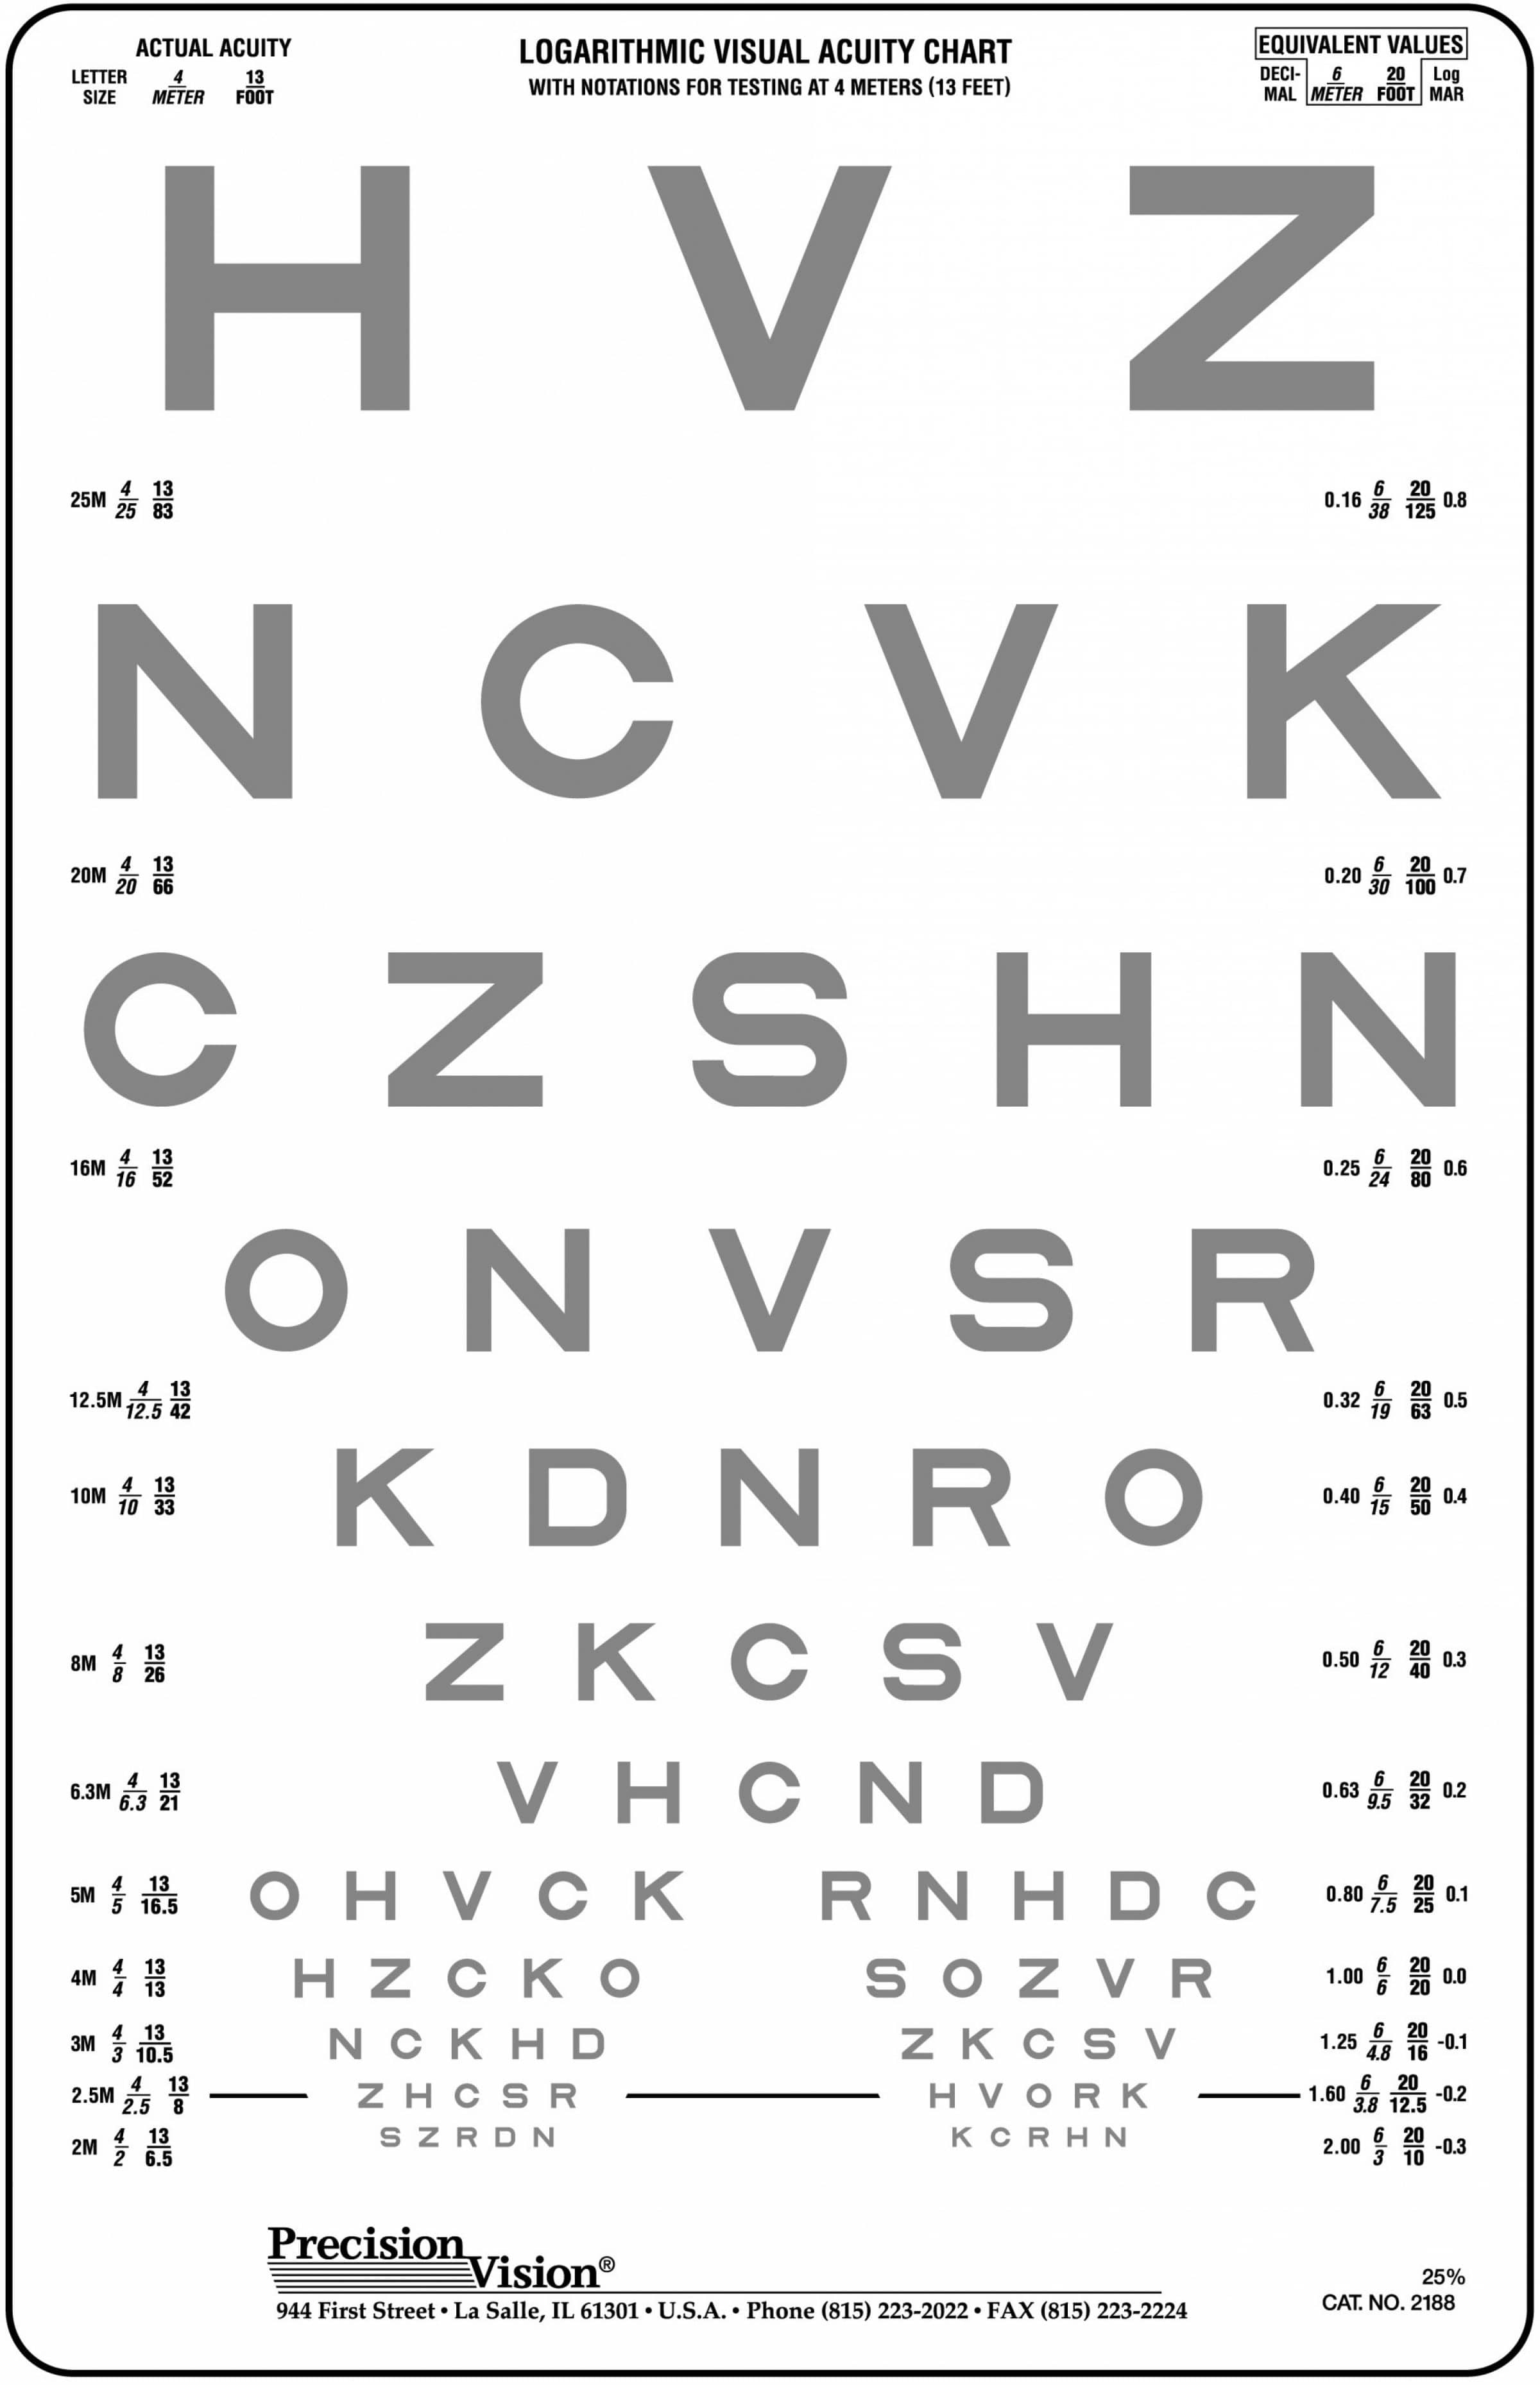 snellen eye chart for visual acuity and color vision test